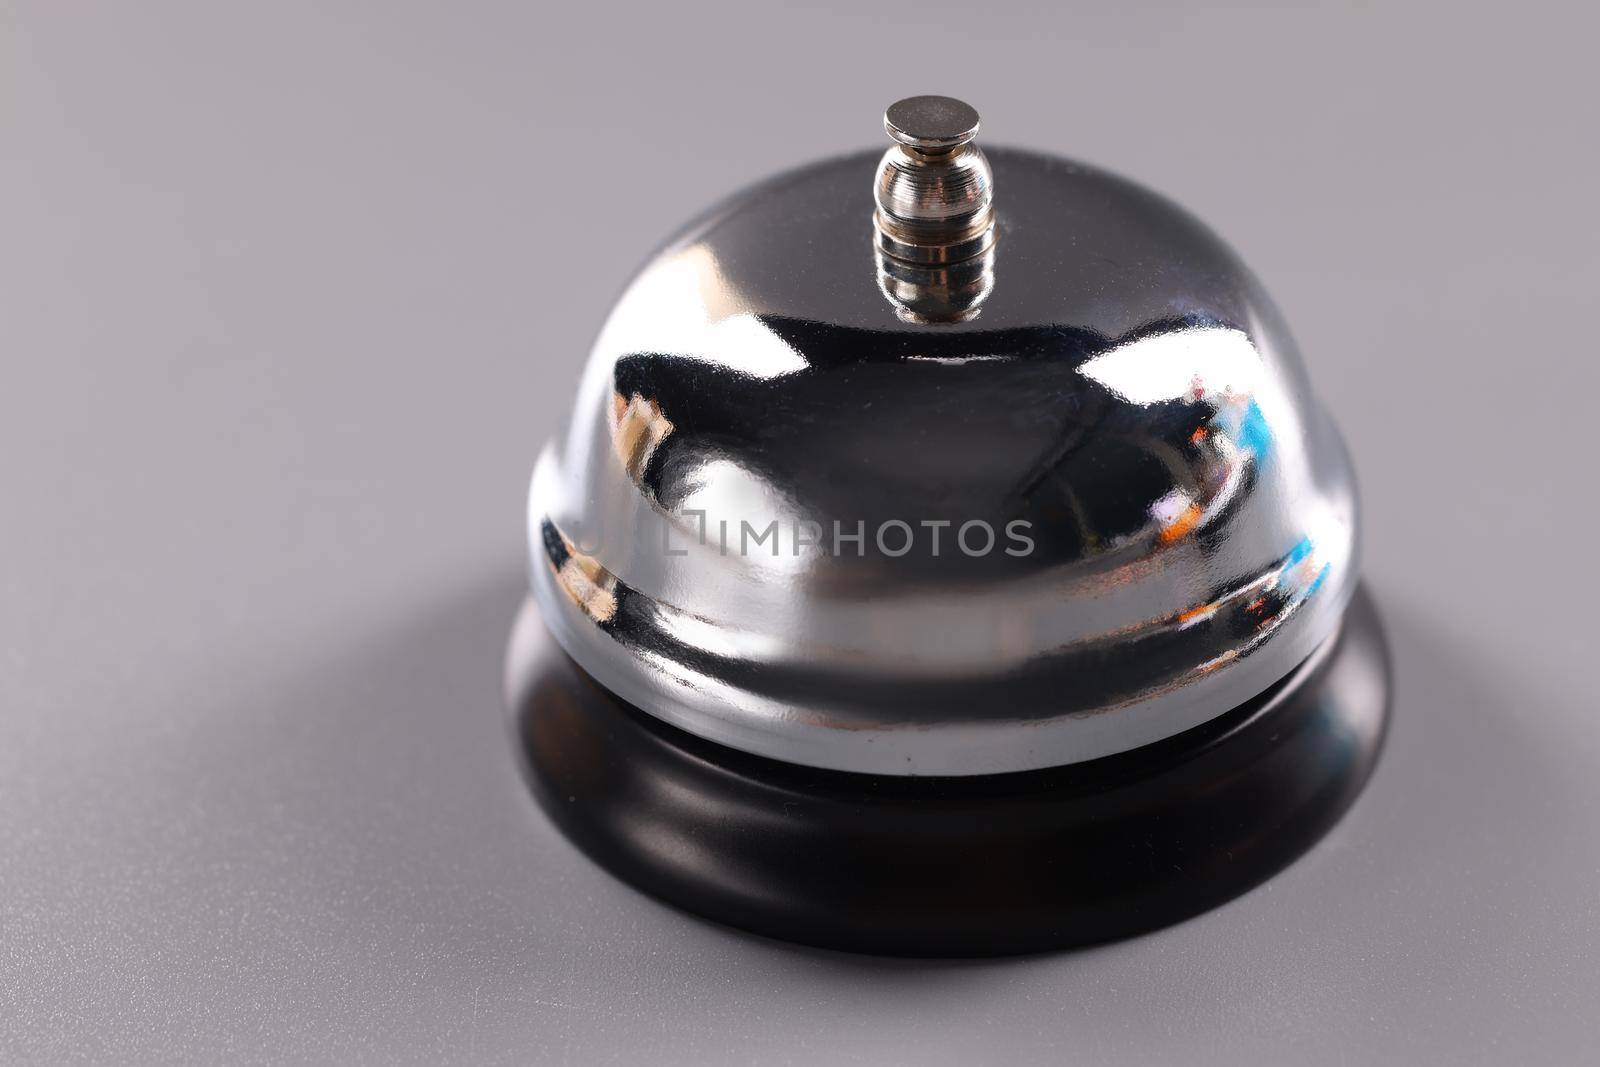 Silver vintage ringing bell on gray background. Ringing bell at the hotel reception and guest area concept